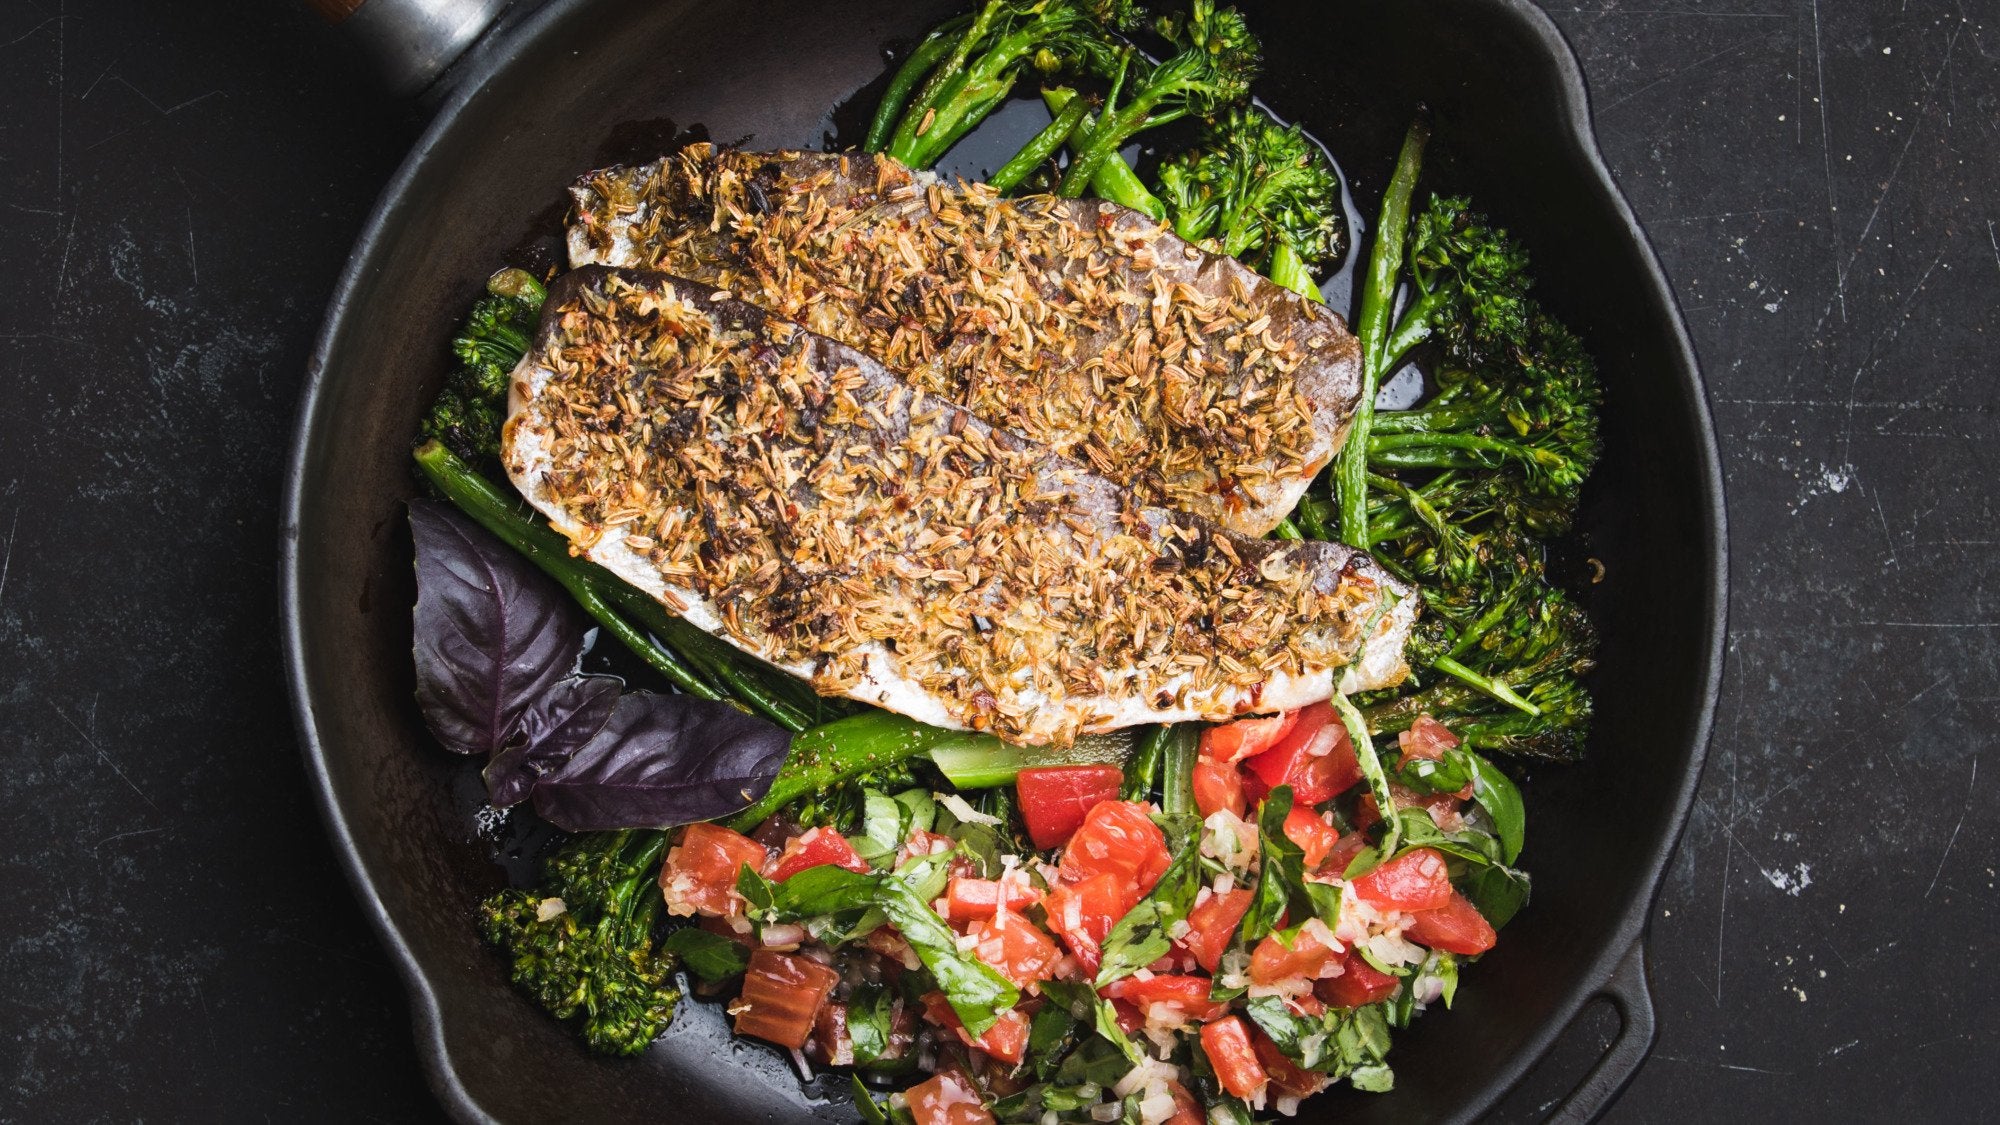 Spiced Trout with Roasted Broccoli and Tomato Dressing